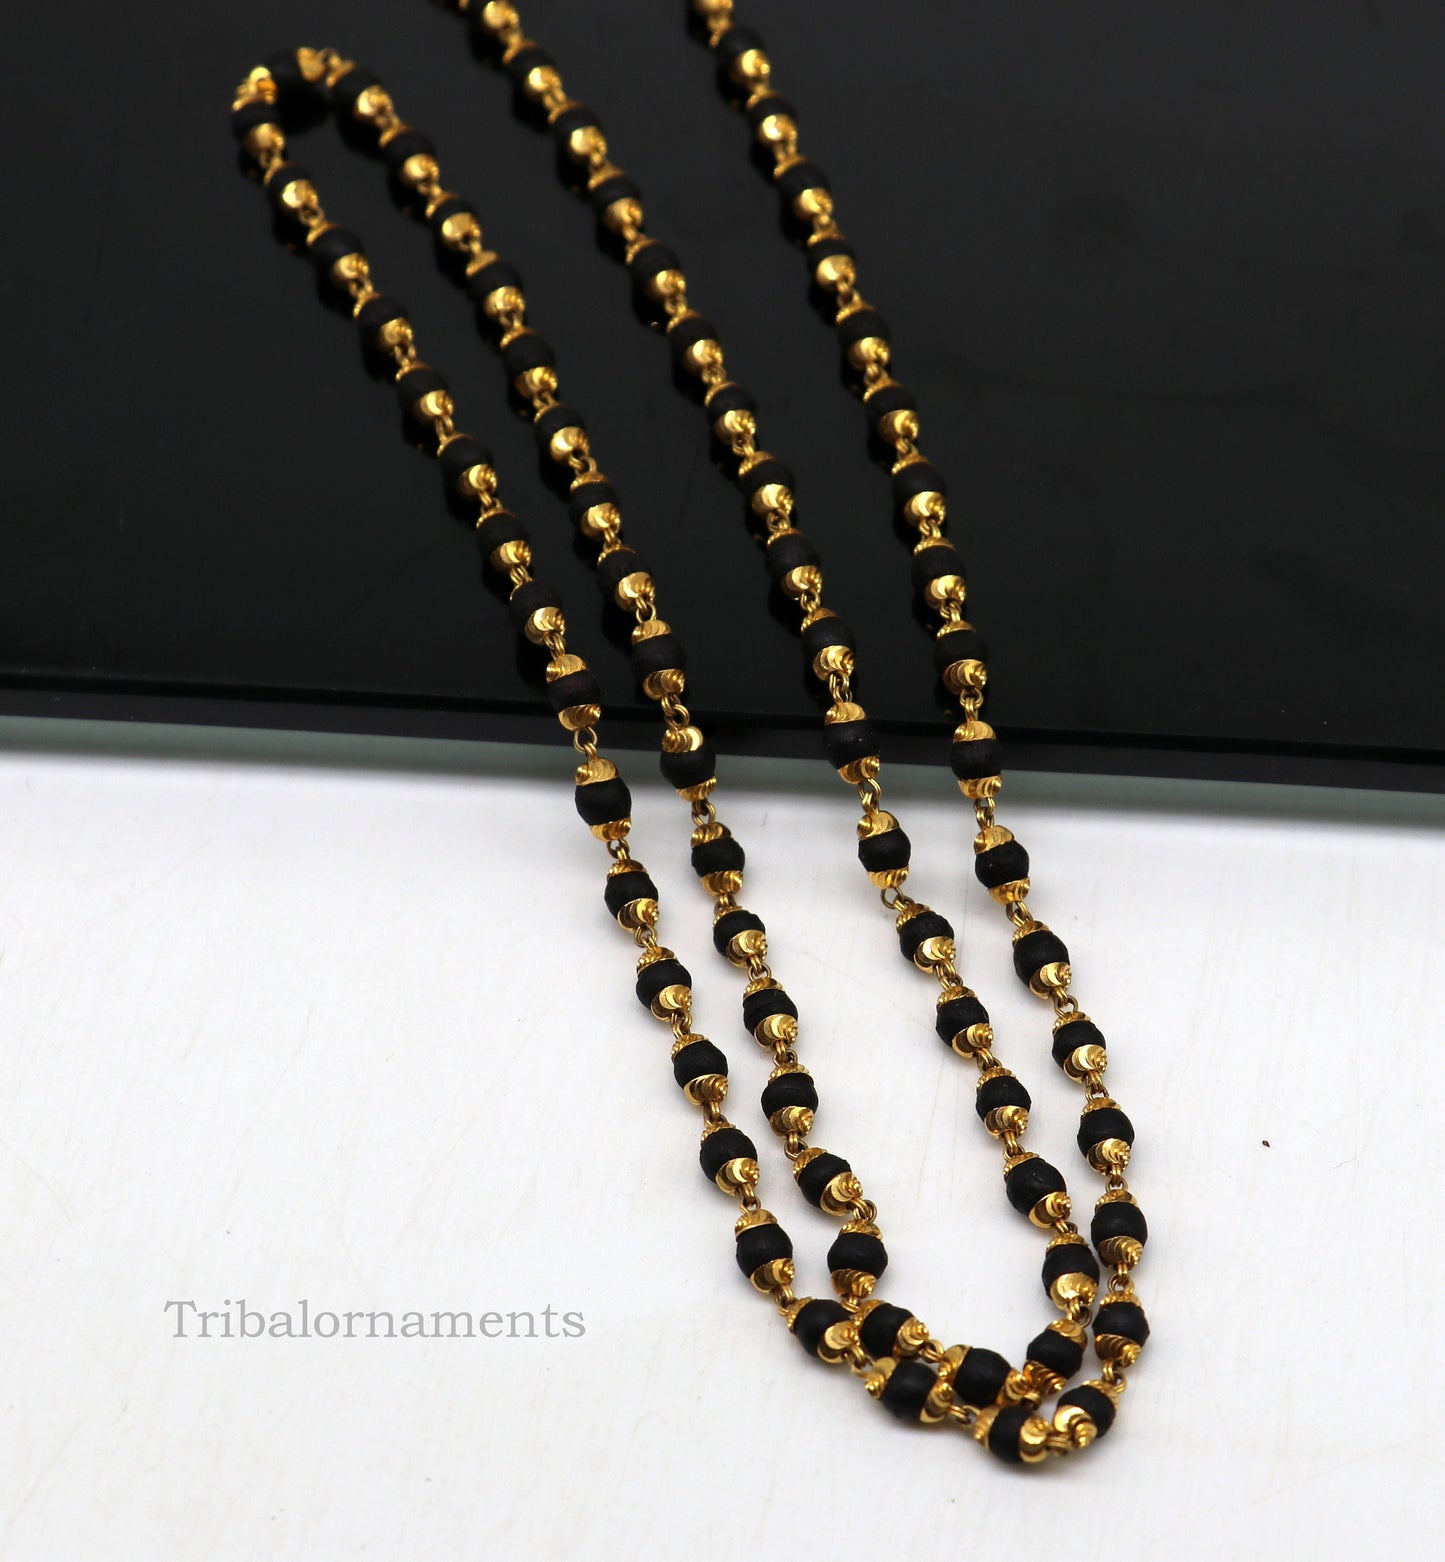 22kt yellow gold hallmarked 4mm Black basil rosary chain necklace, Gorgeous customized beaded chain, excellent wedding gifting jewelry ch263 - TRIBAL ORNAMENTS